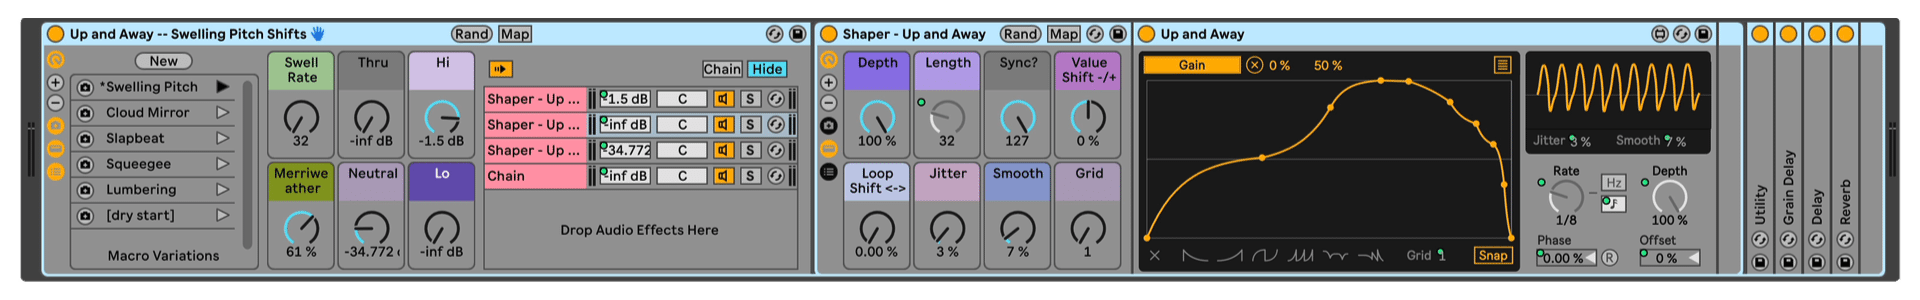 Shapes Ableton Live Pack by pATCHES & PerforModule